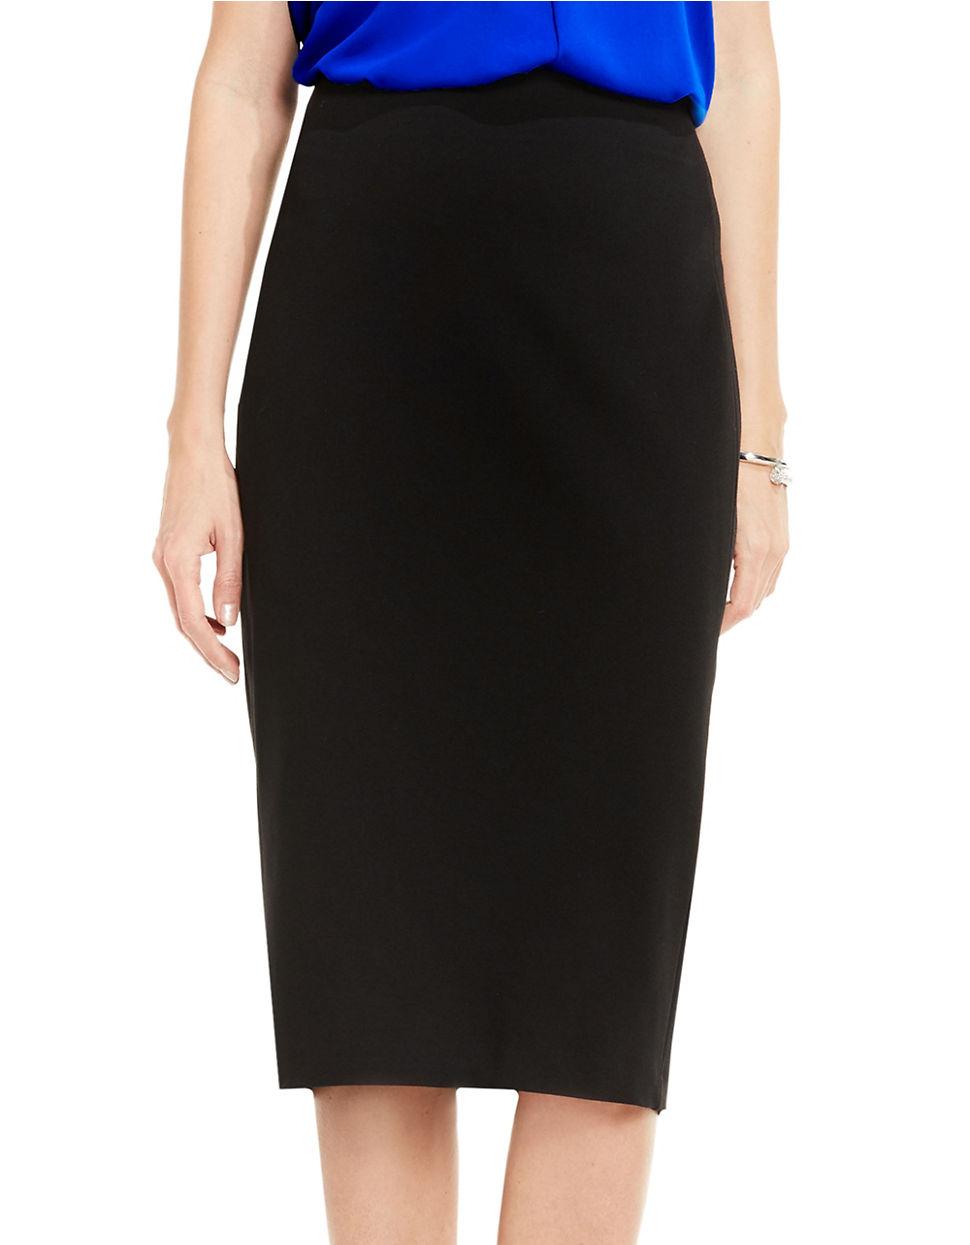 Vince camuto Solid Pencil Skirt in Black | Lyst